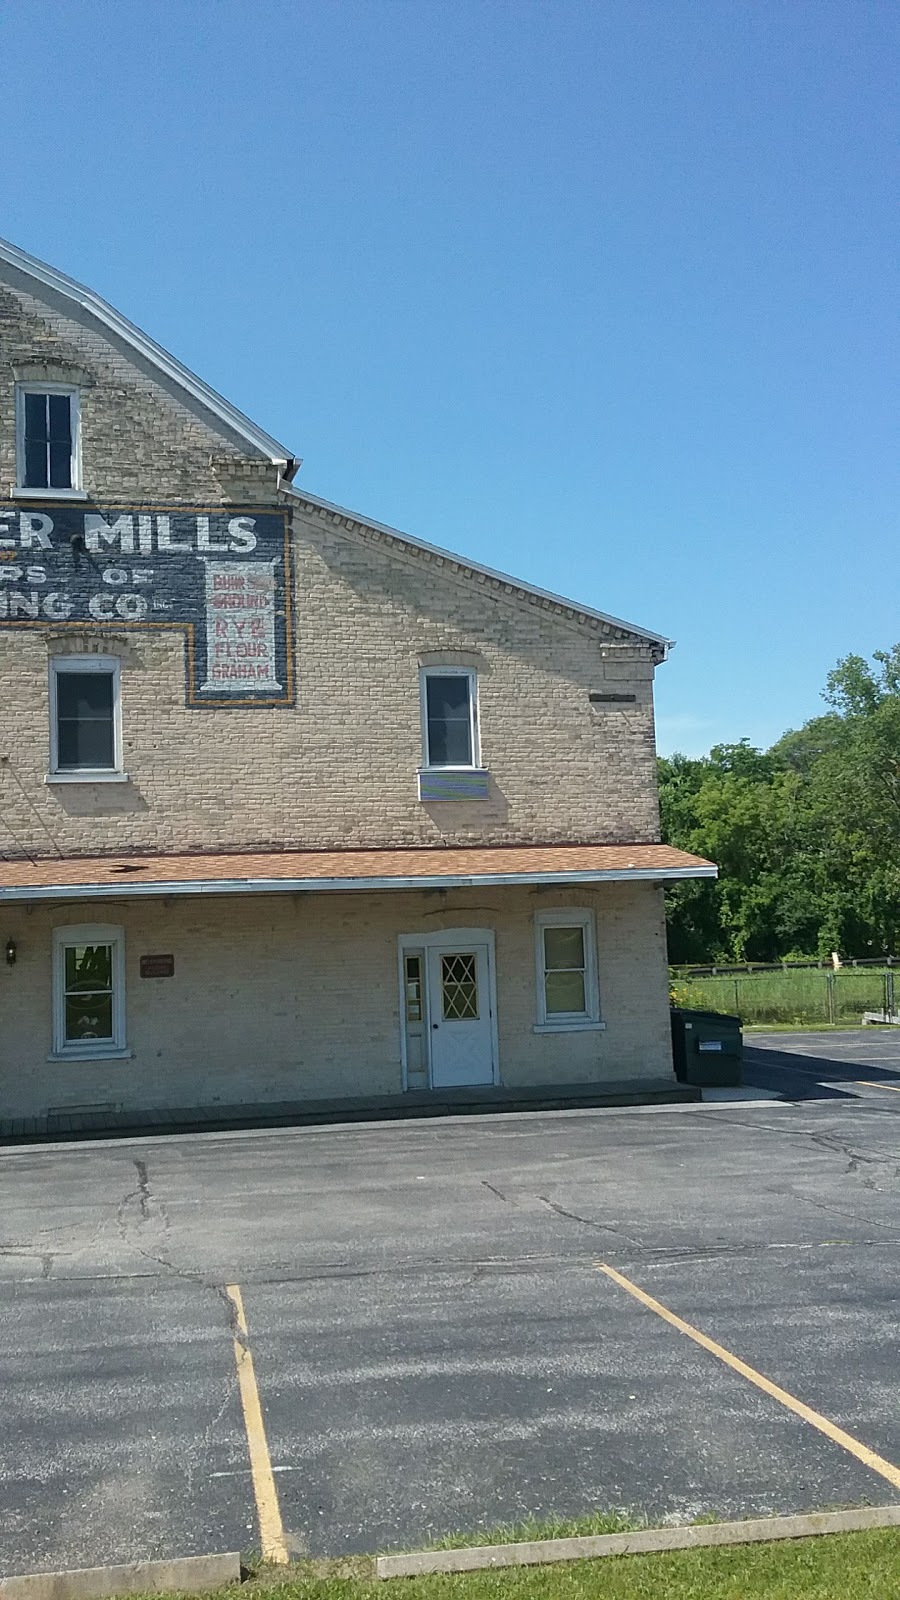 Barton Roller Mill | 1784 Barton Ave, West Bend, WI 53090, USA | Phone: (262) 334-3725